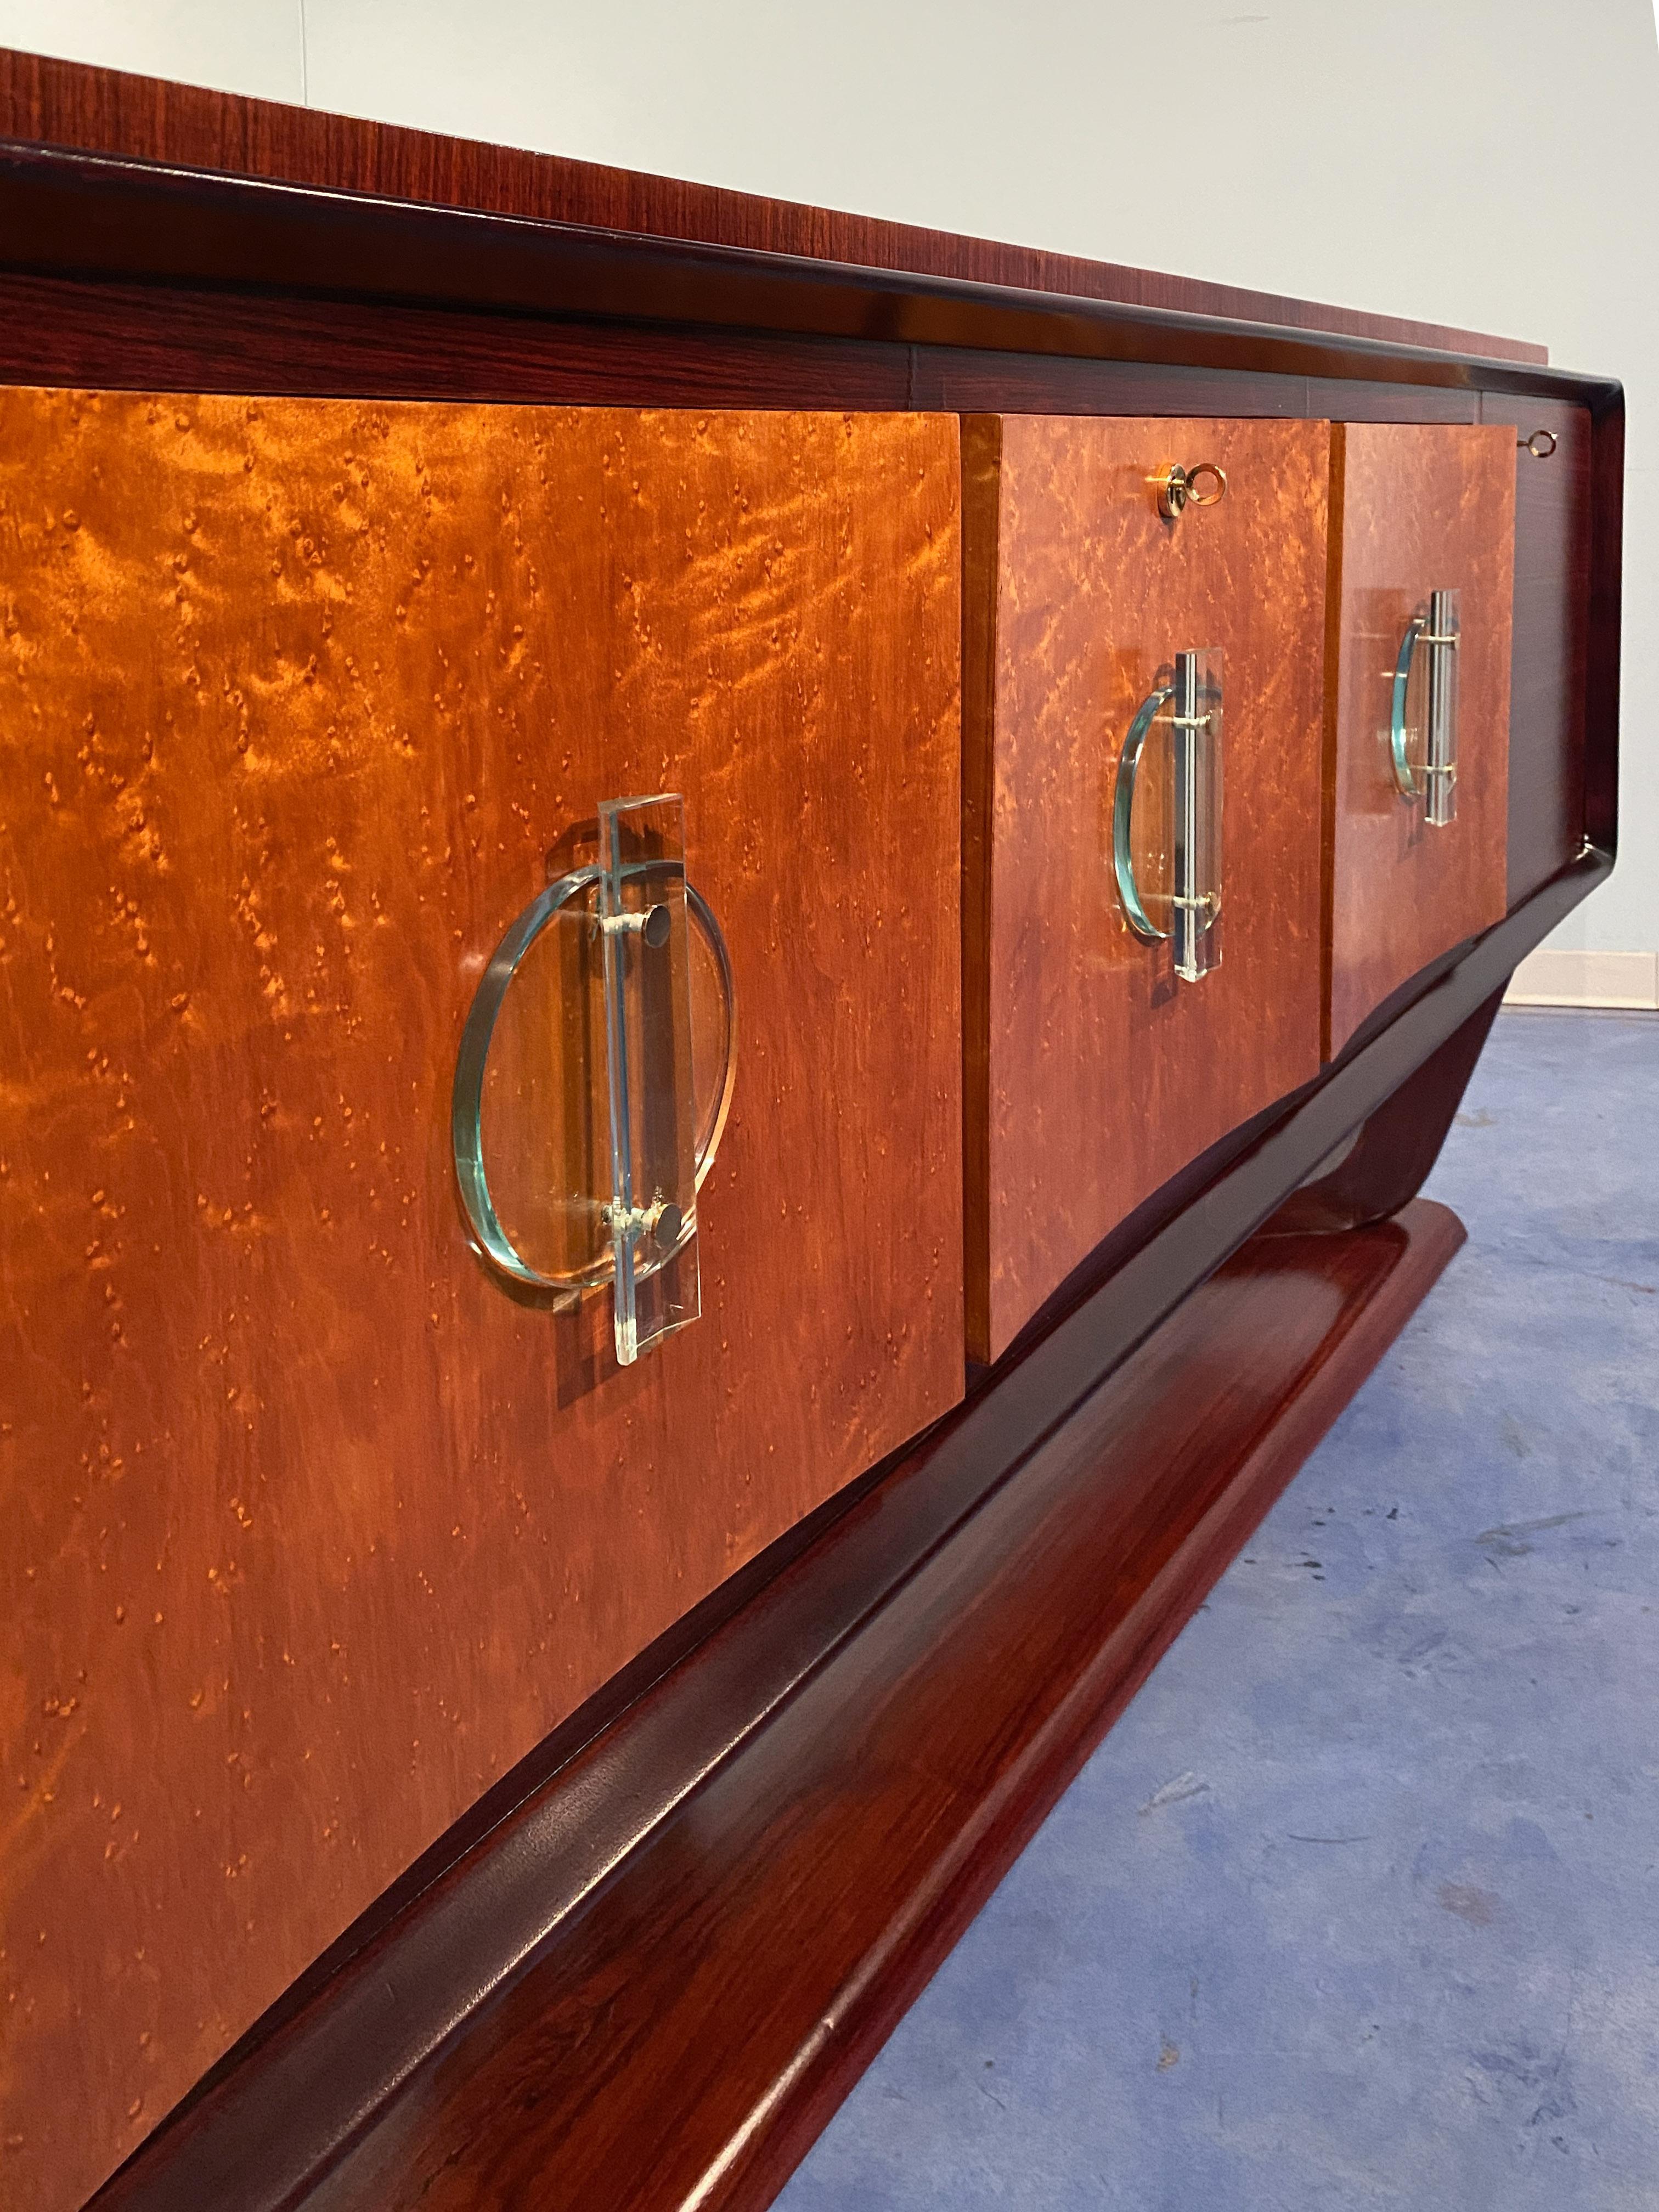 Italian Art Deco Sideboard with Bar Cabinet Attributed to Osvaldo Borsani, 1940s For Sale 8